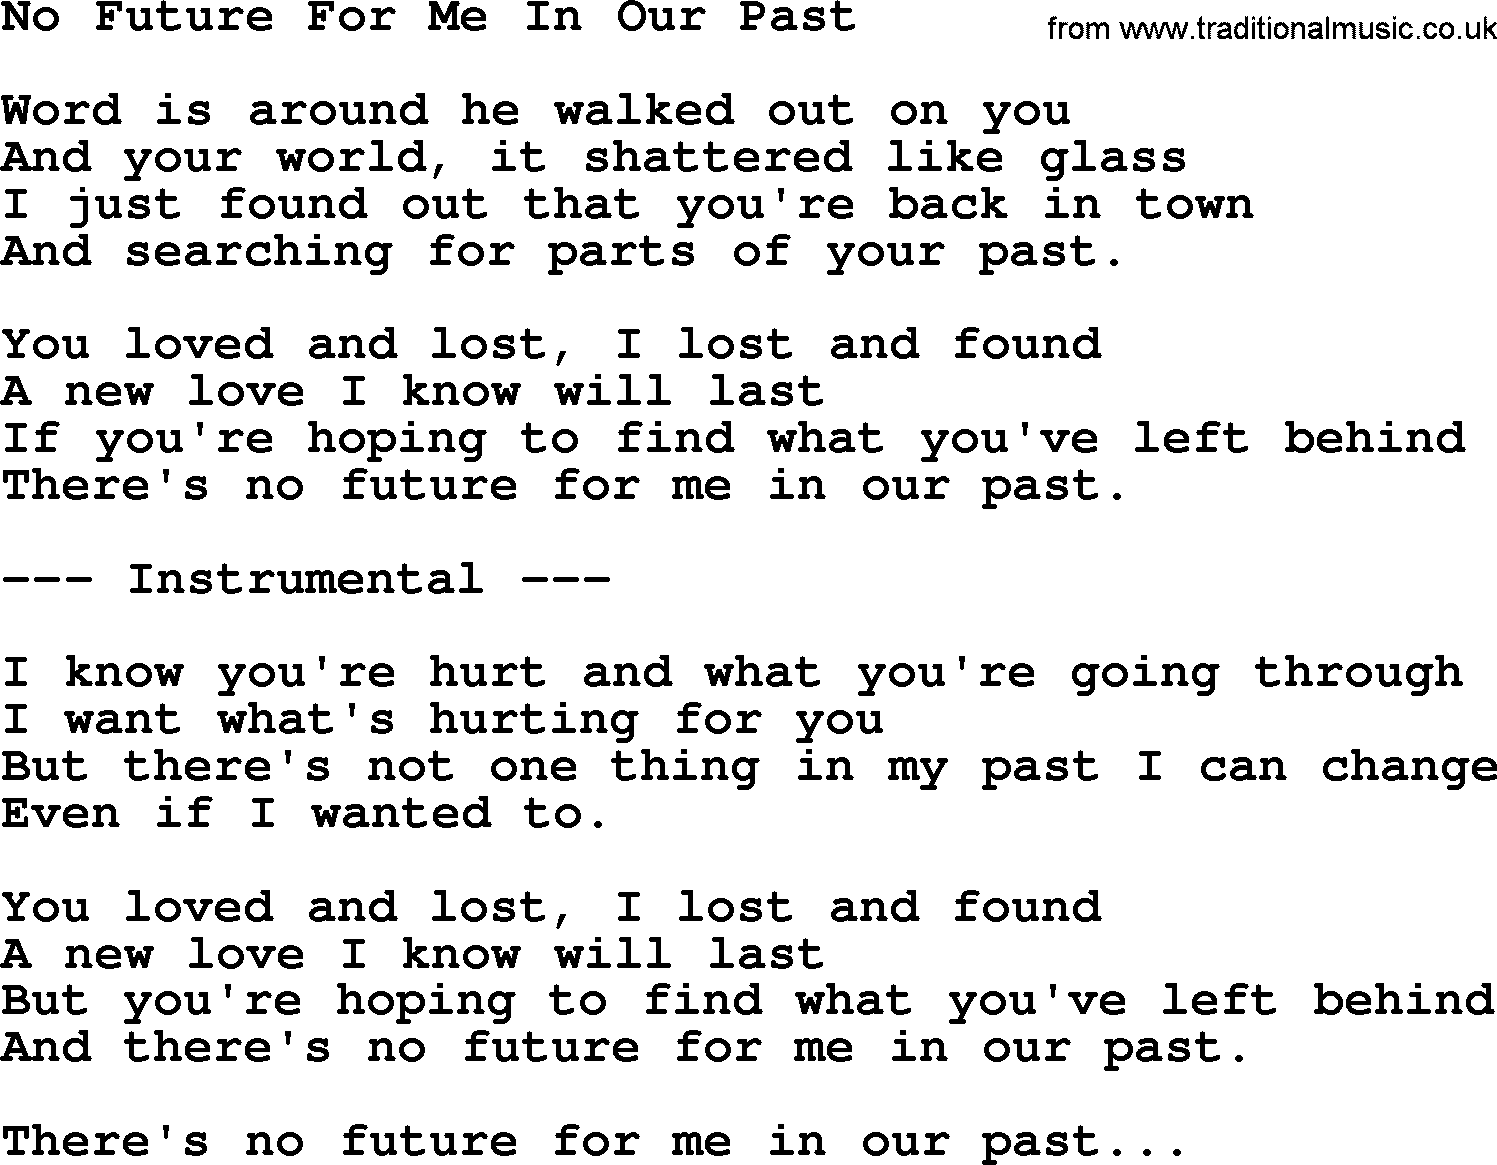 George Jones song: No Future For Me In Our Past, lyrics